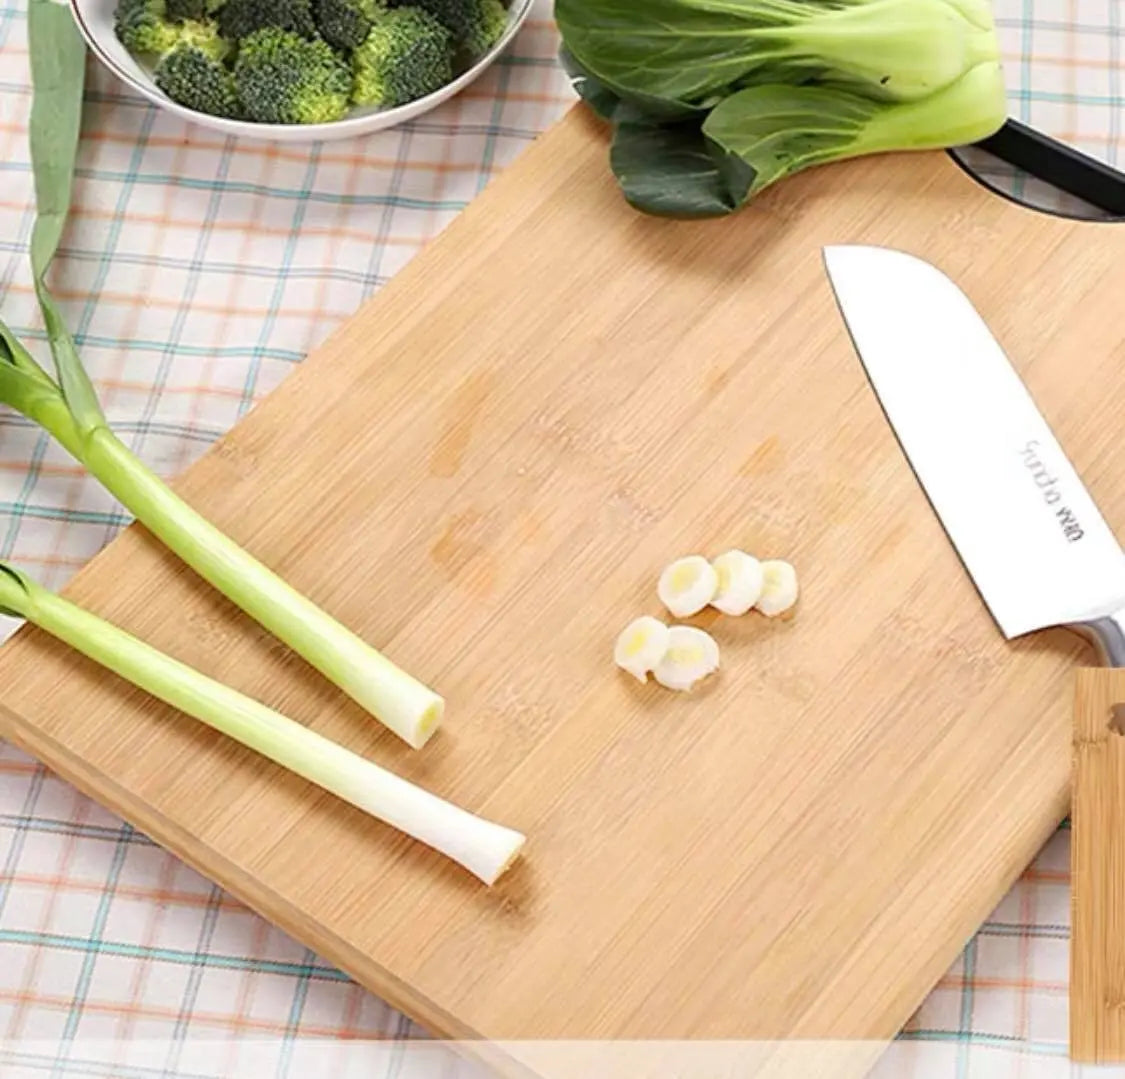 Bamboo Chopping Board Cutting Natural Wooden Kitchen Many Sizes everythingbamboo